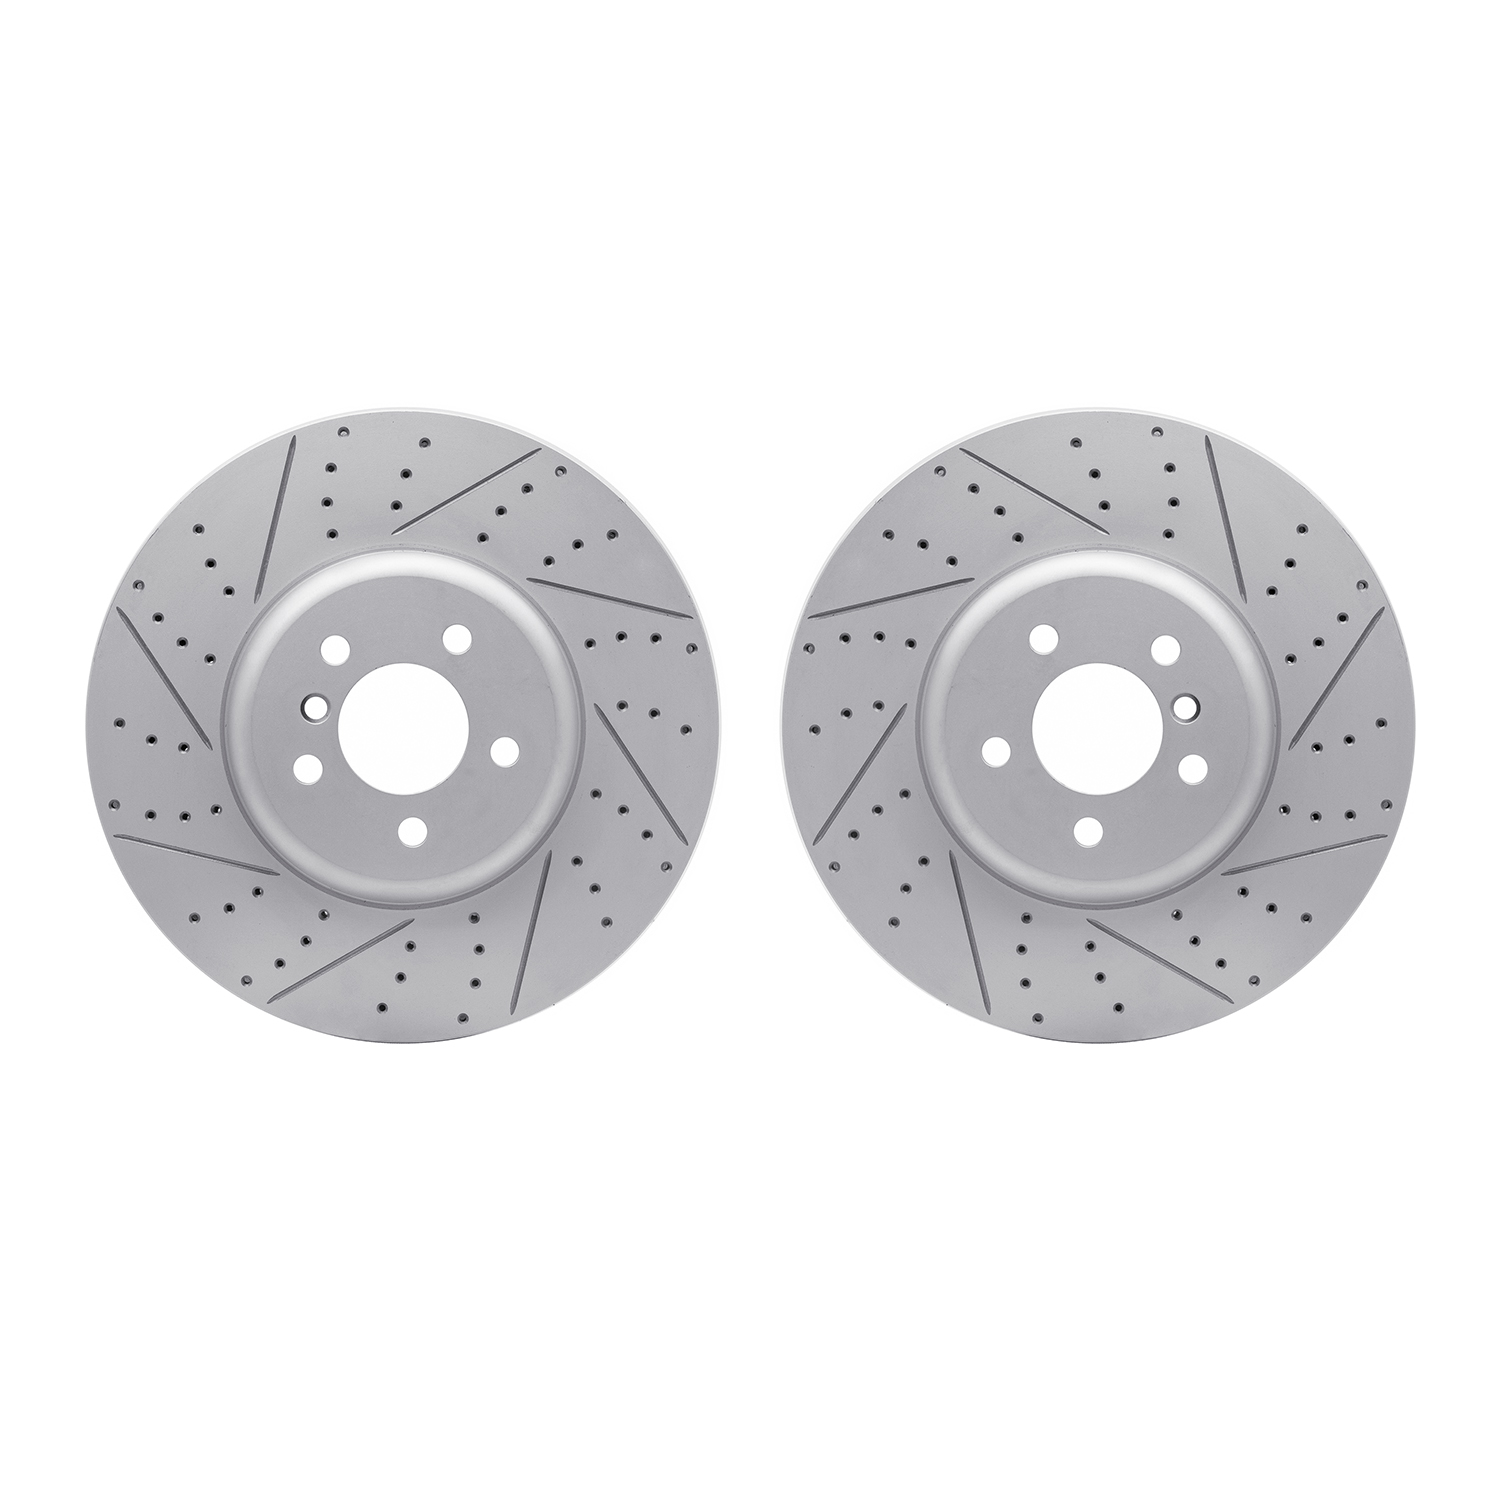 2002-31030 Geoperformance Drilled/Slotted Brake Rotors, 2009-2017 BMW, Position: Front